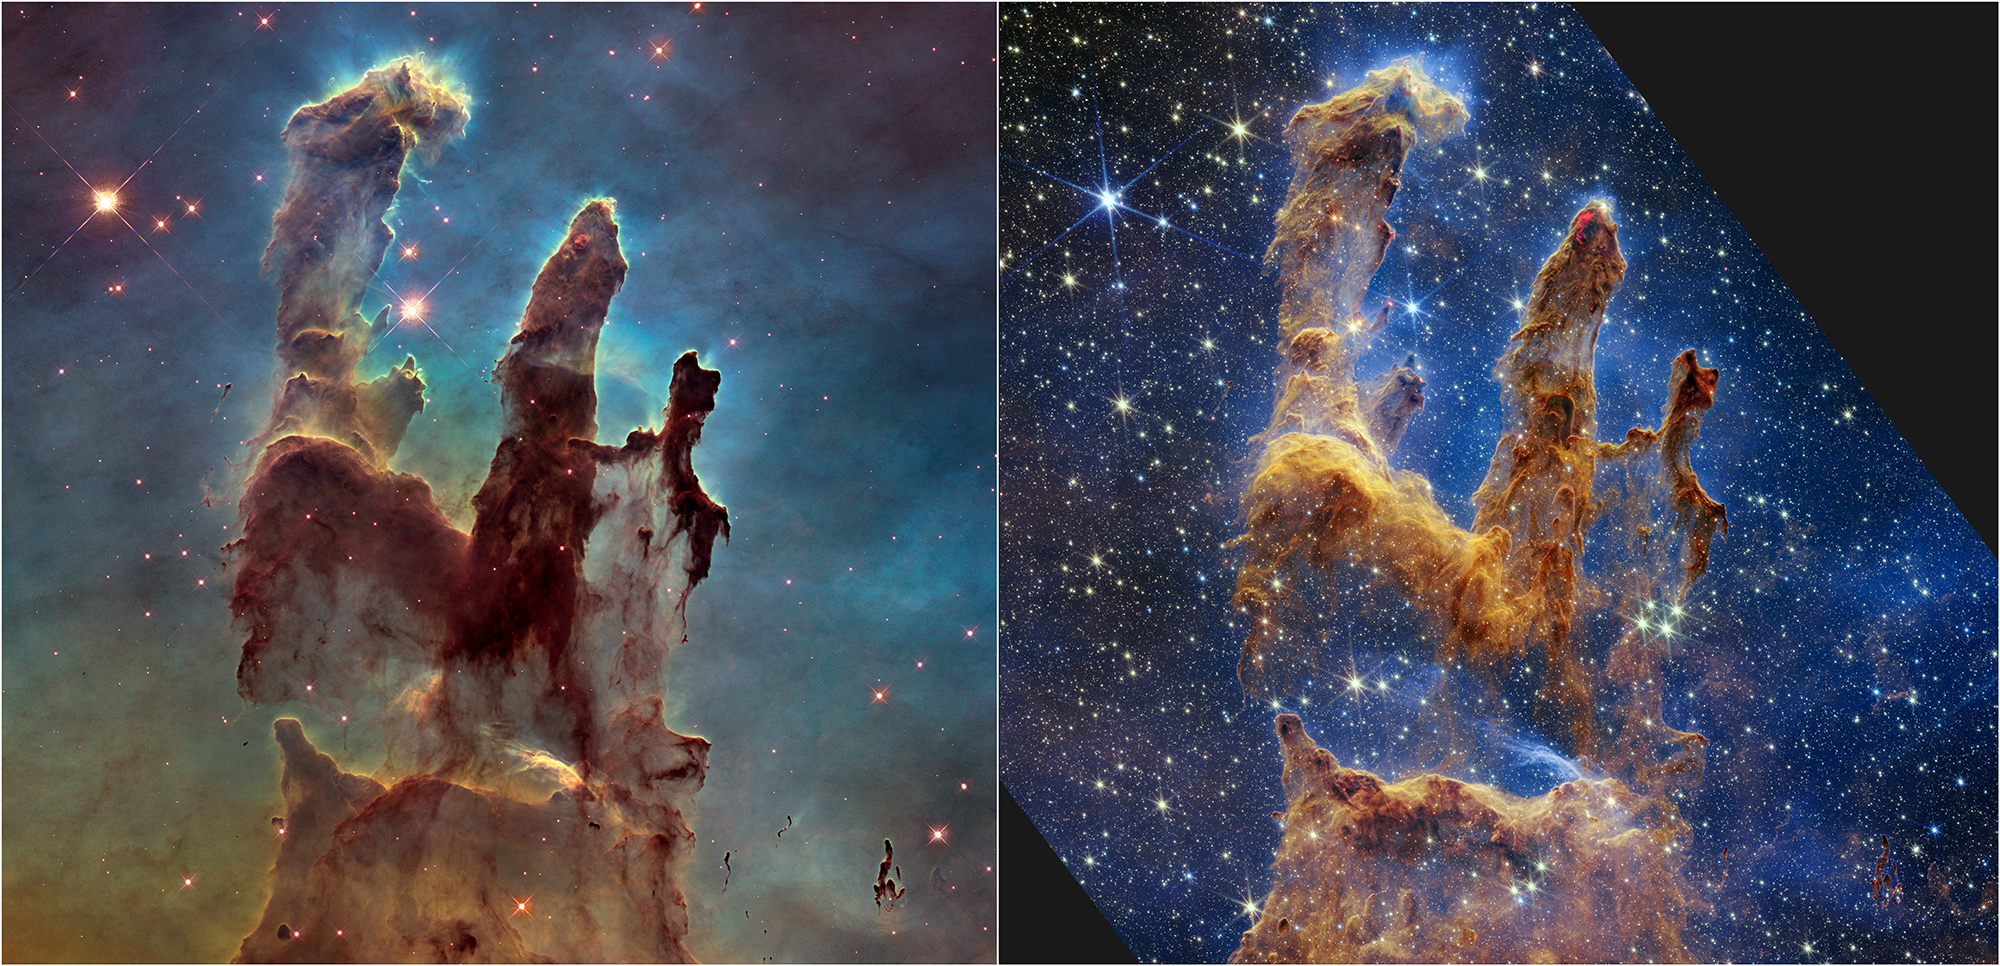 NASA's Hubble Space Telescope made the Pillars of Creation famous with its first image in 1995, but revisited the scene in 2014 to reveal a sharper, wider view in visible light, shown above at left. A new, near-infrared-light view from NASA’s James Webb Space Telescope, at right, helps us peer through more of the dust in this star-forming region. The thick, dusty brown pillars are no longer as opaque and many more red stars that are still forming come into view. While the pillars of gas and dust seem darker and less penetrable in Hubble’s view, they appear more diaphanous in Webb’s. Both views show us what is happening locally. Although Hubble highlights many more thick layers of dust and Webb shows more of the stars, neither shows us the deeper universe. Dust blocks the view in Hubble’s image, but the interstellar medium plays a major role in Webb’s. It acts like thick smoke or fog, preventing us from peering into the deeper universe, where countless galaxies exist. The pillars are a small region within the Eagle Nebula, a vast star-forming region 6,500 light-years from Earth. Image: NASA, ESA, CSA, STScI, Hubble Heritage Project (STScI, AURA) / Joseph DePasquale (STScI), Anton M. Koekemoer (STScI), Alyssa Pagan (STScI)